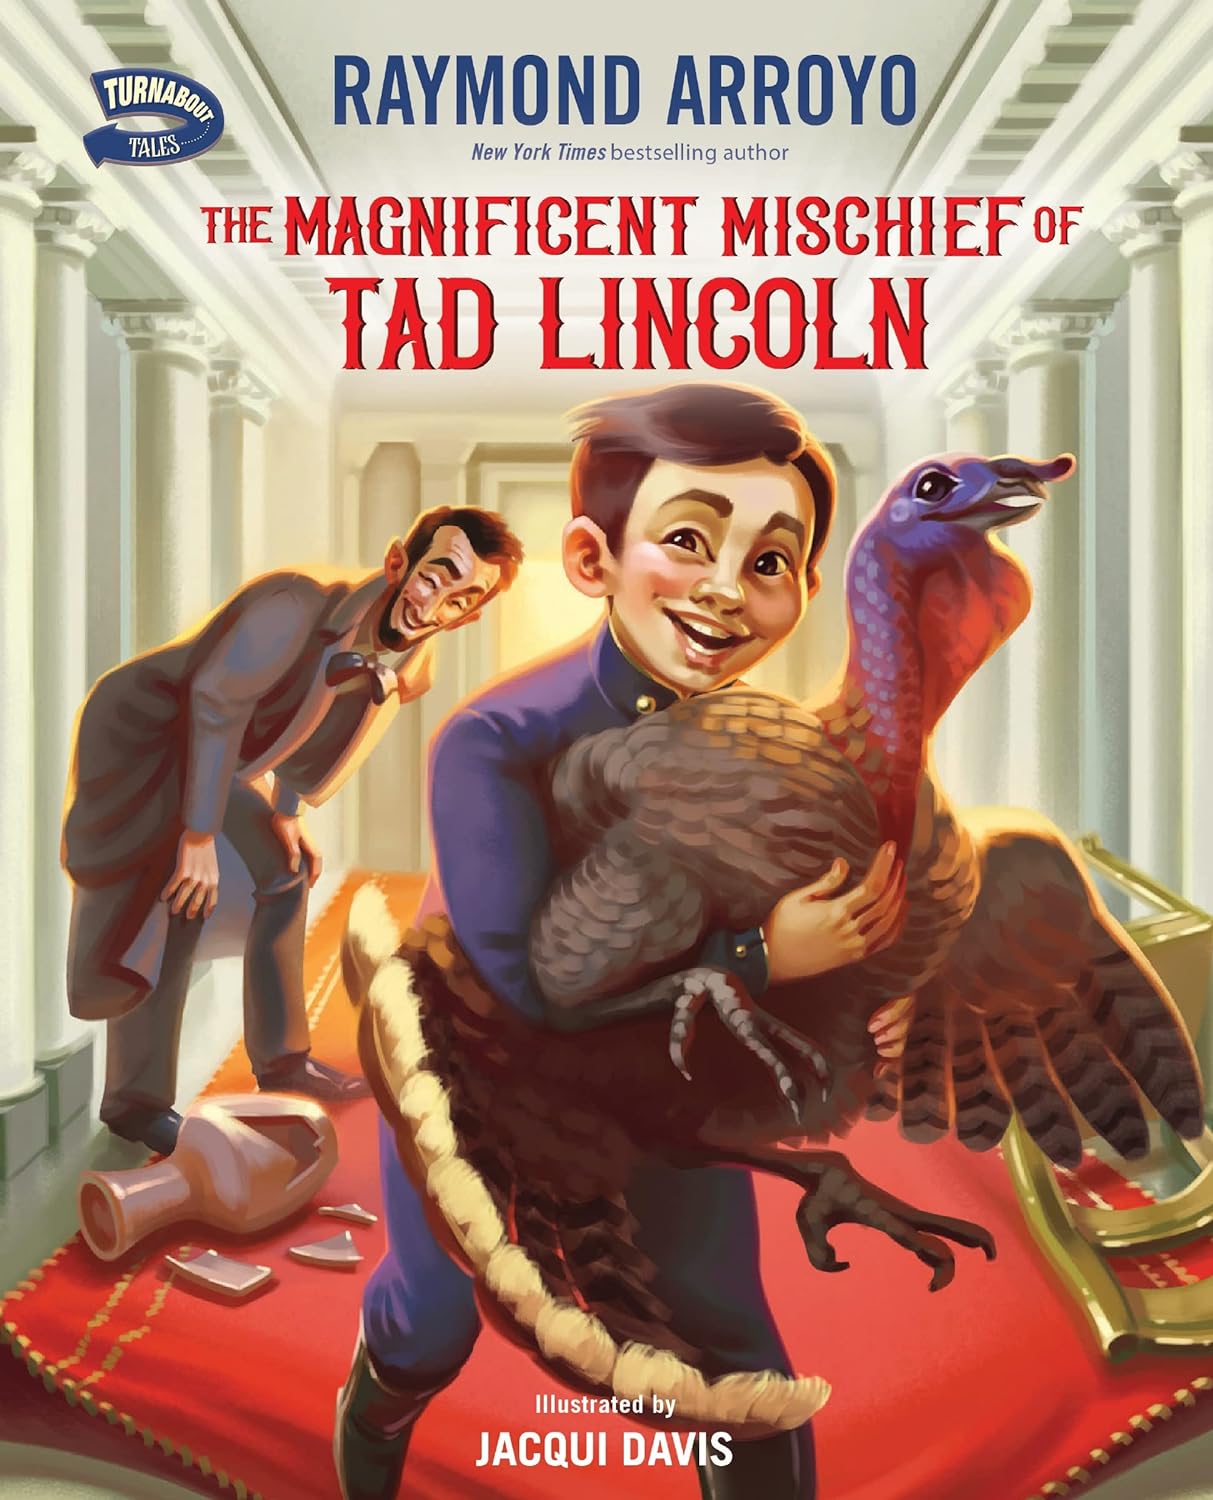 The Magnificent Mischief of Tad Lincoln (Turnabout Tales